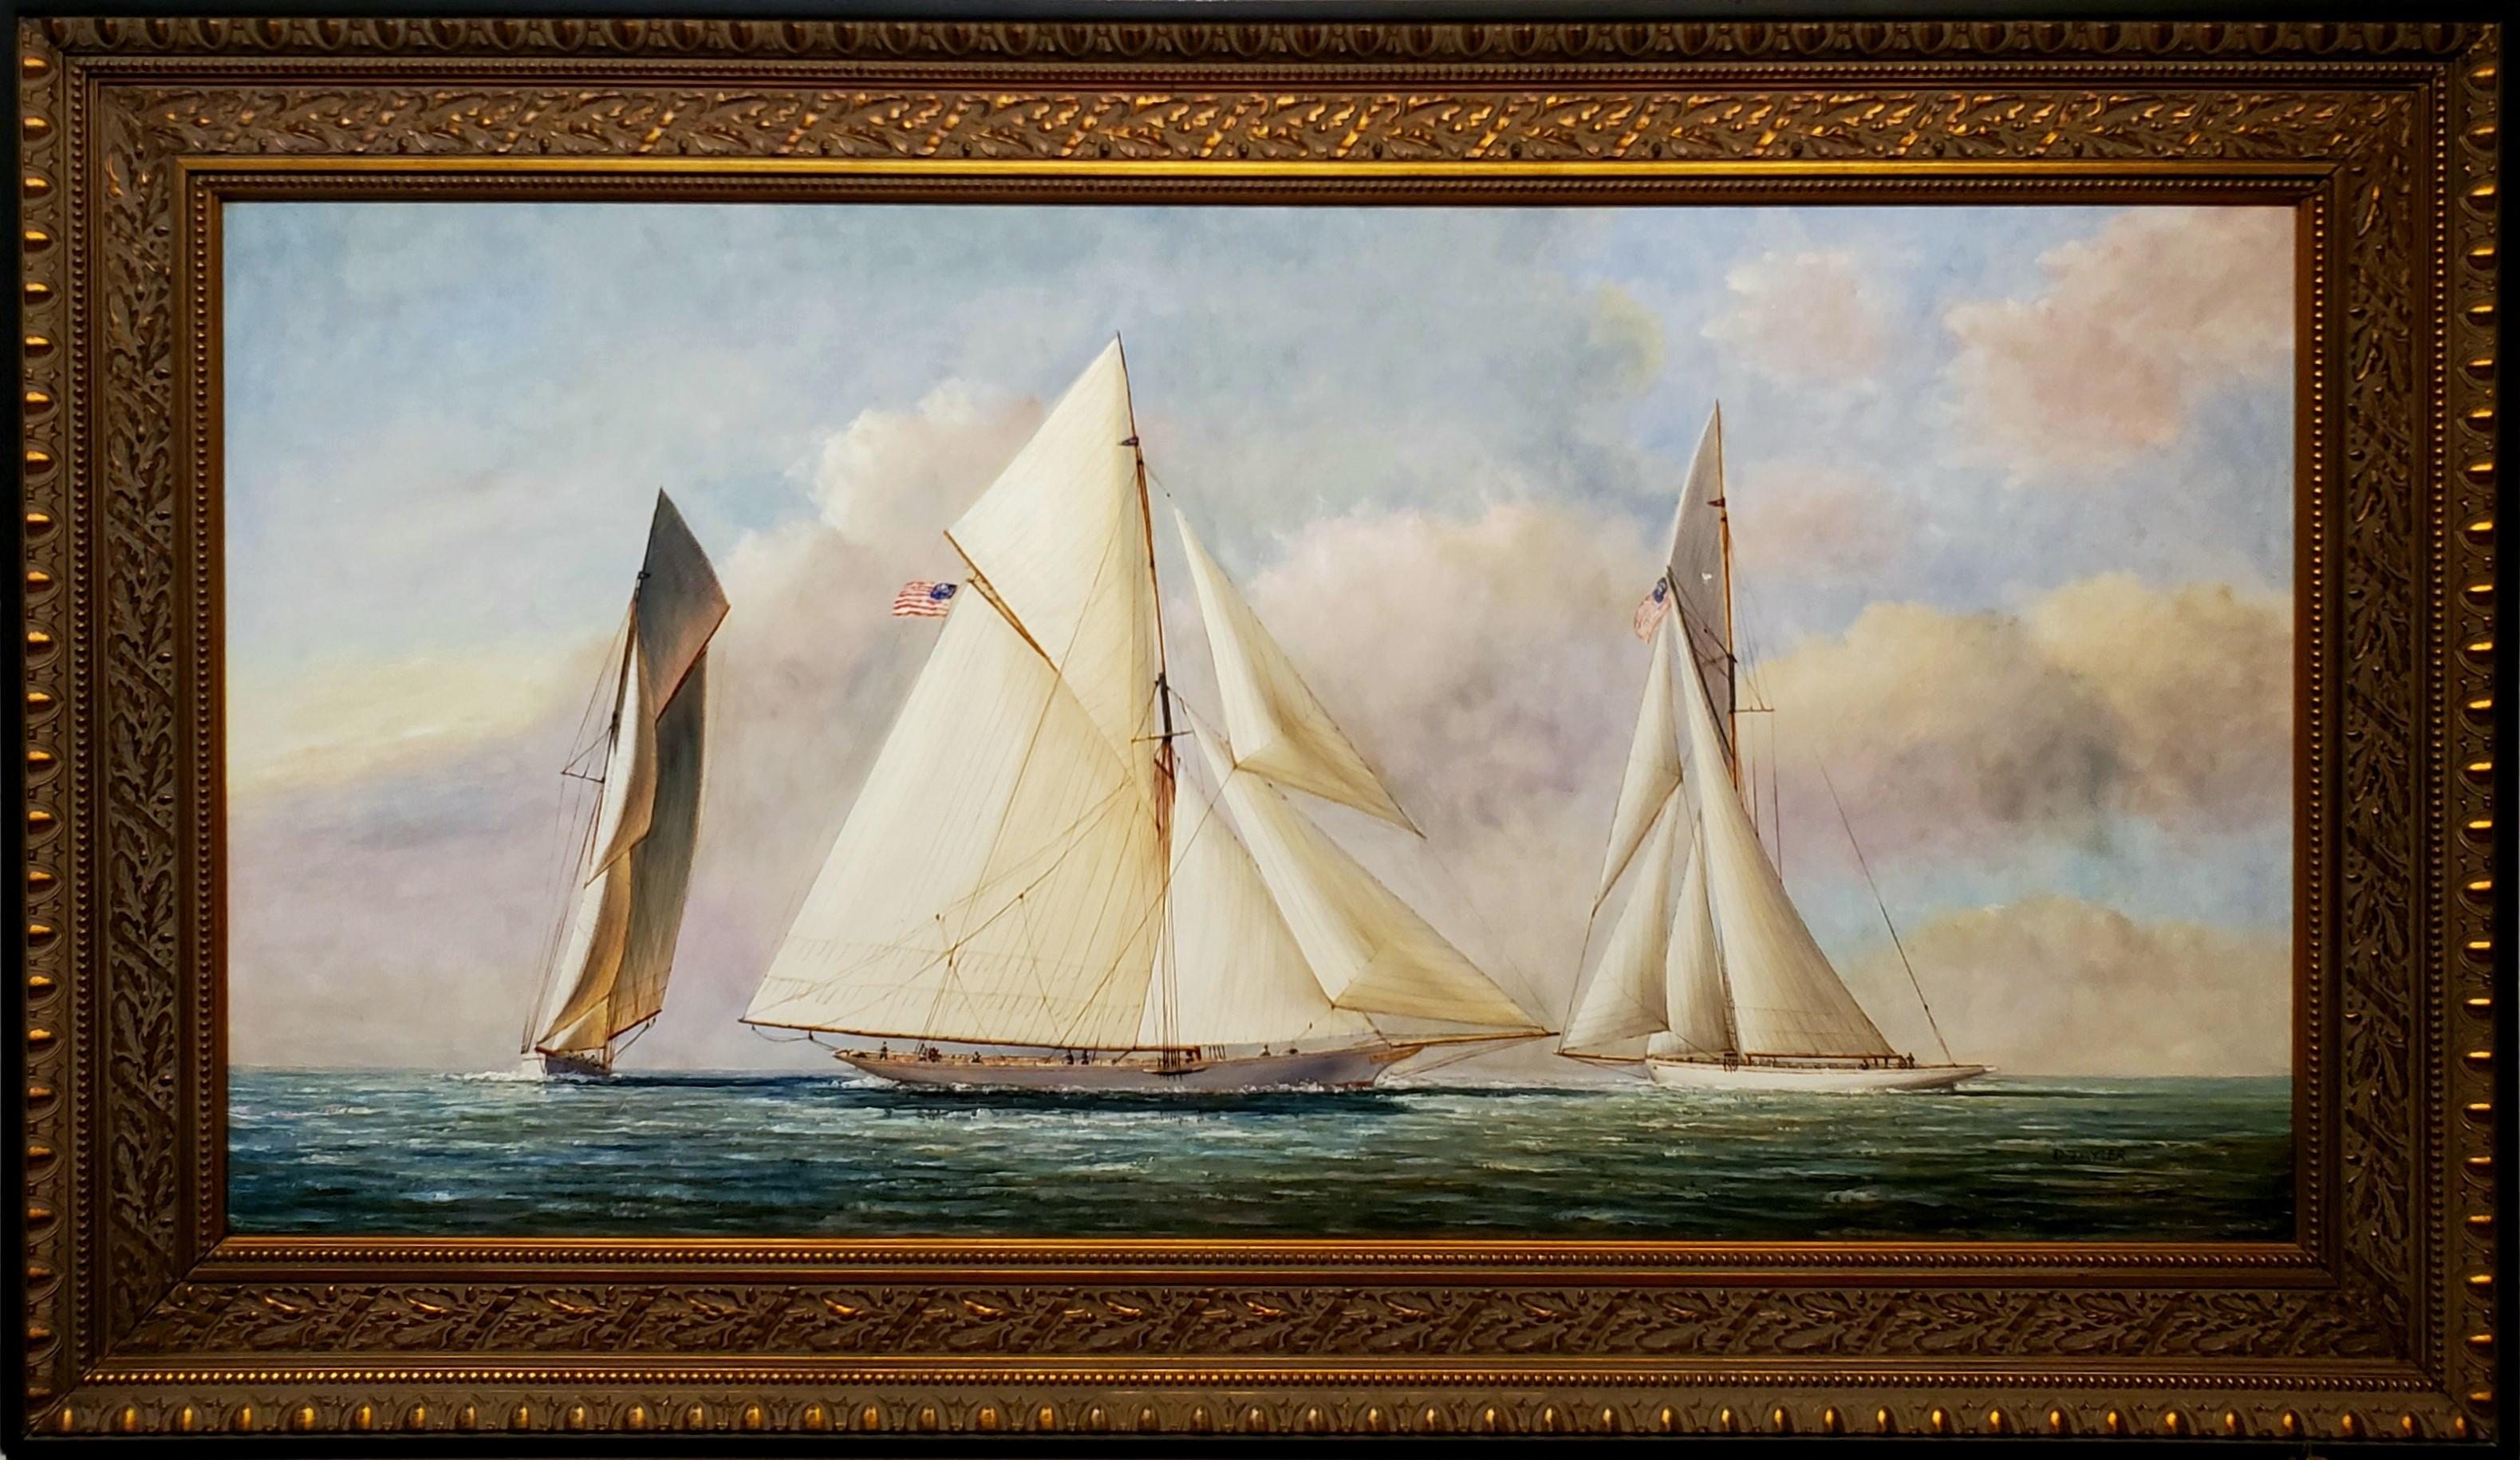 Wide Maritime Landscape Painting of 3 Sailboats At Sea by D. Tayler. 

This nautical painting depicts 3 sailboats at sea under full sail in a wide format.

D. Tayler is a is a well-known American marine artist from Massachusetts. 

Tayler is known